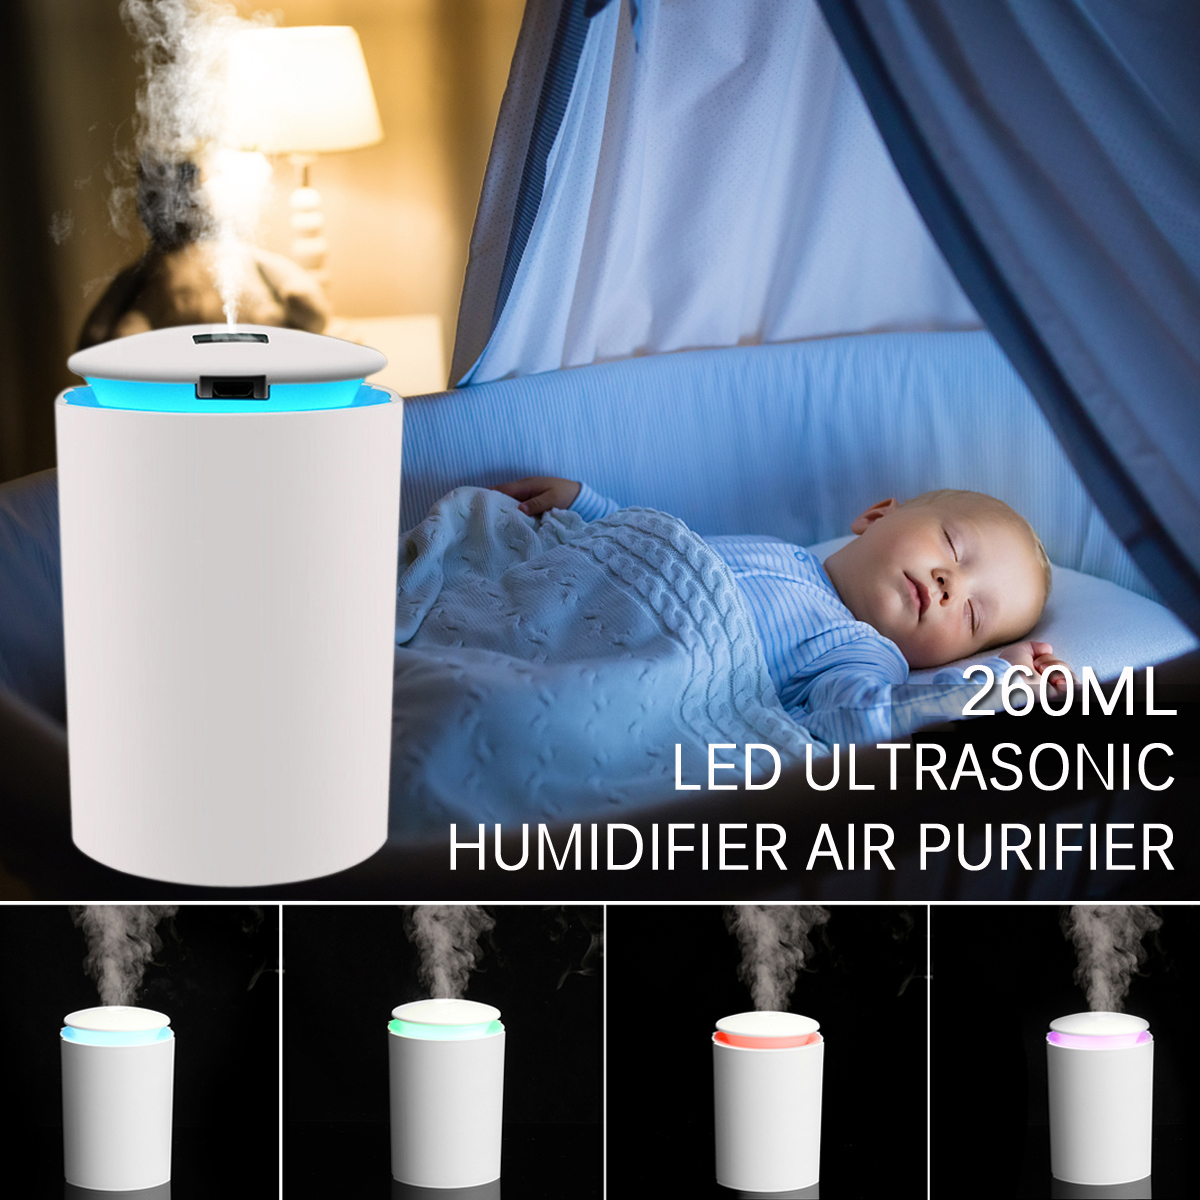 260ml-Air-Purifier-Mist-Ultrasonic-Humidifiers-LED-Lights-Washable-Home-Camping-Travel-1700971-1